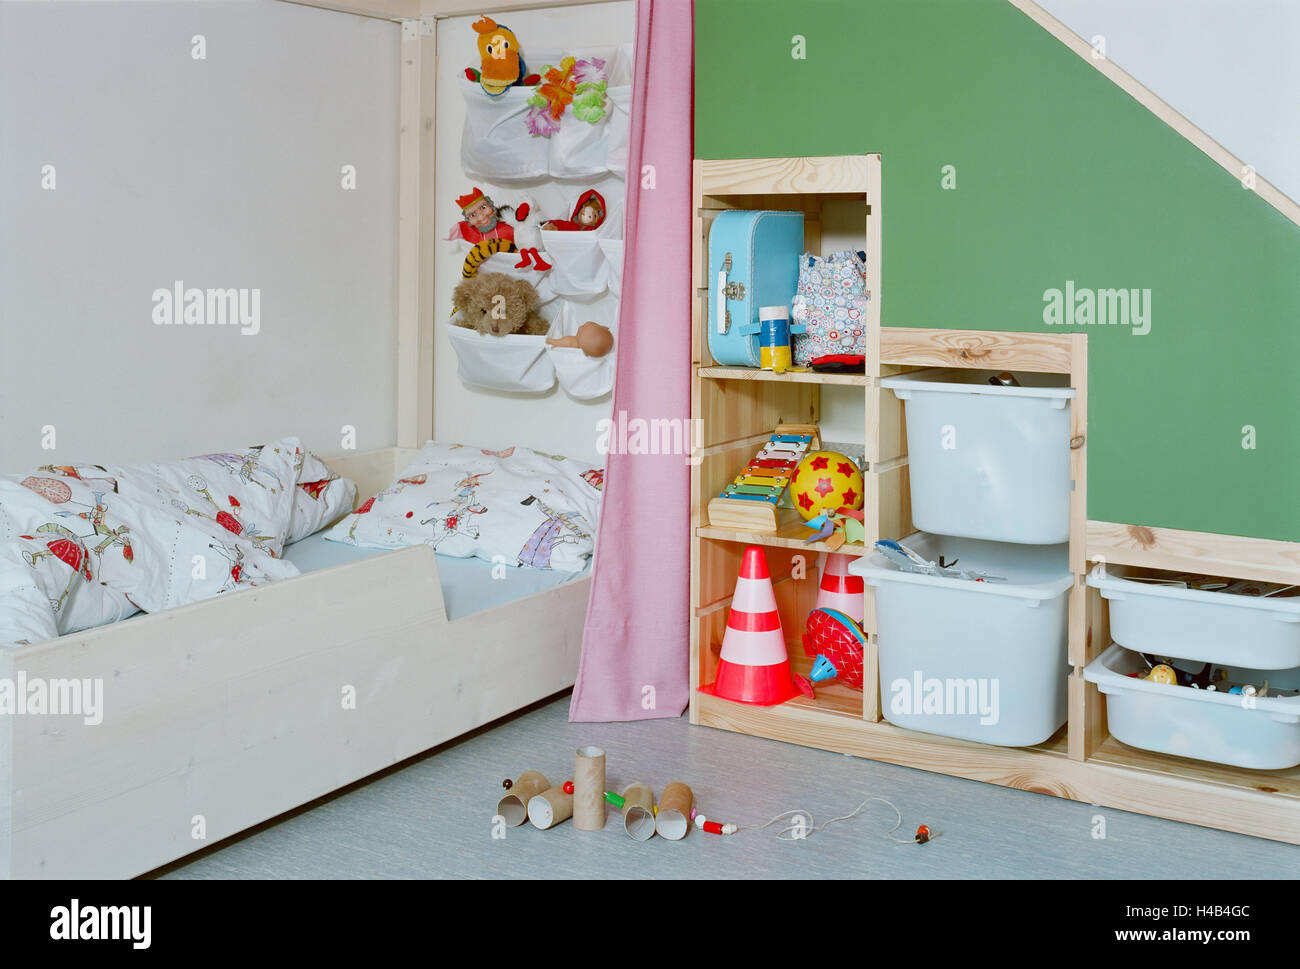 Children's rooms, bed, shelf, toys, rooms, child, cot, wall, pouches, hang, little hanging etas, soft toys, shelf, wooden, wooden shelf, boxes, deserted, wall, green, Stock Photo